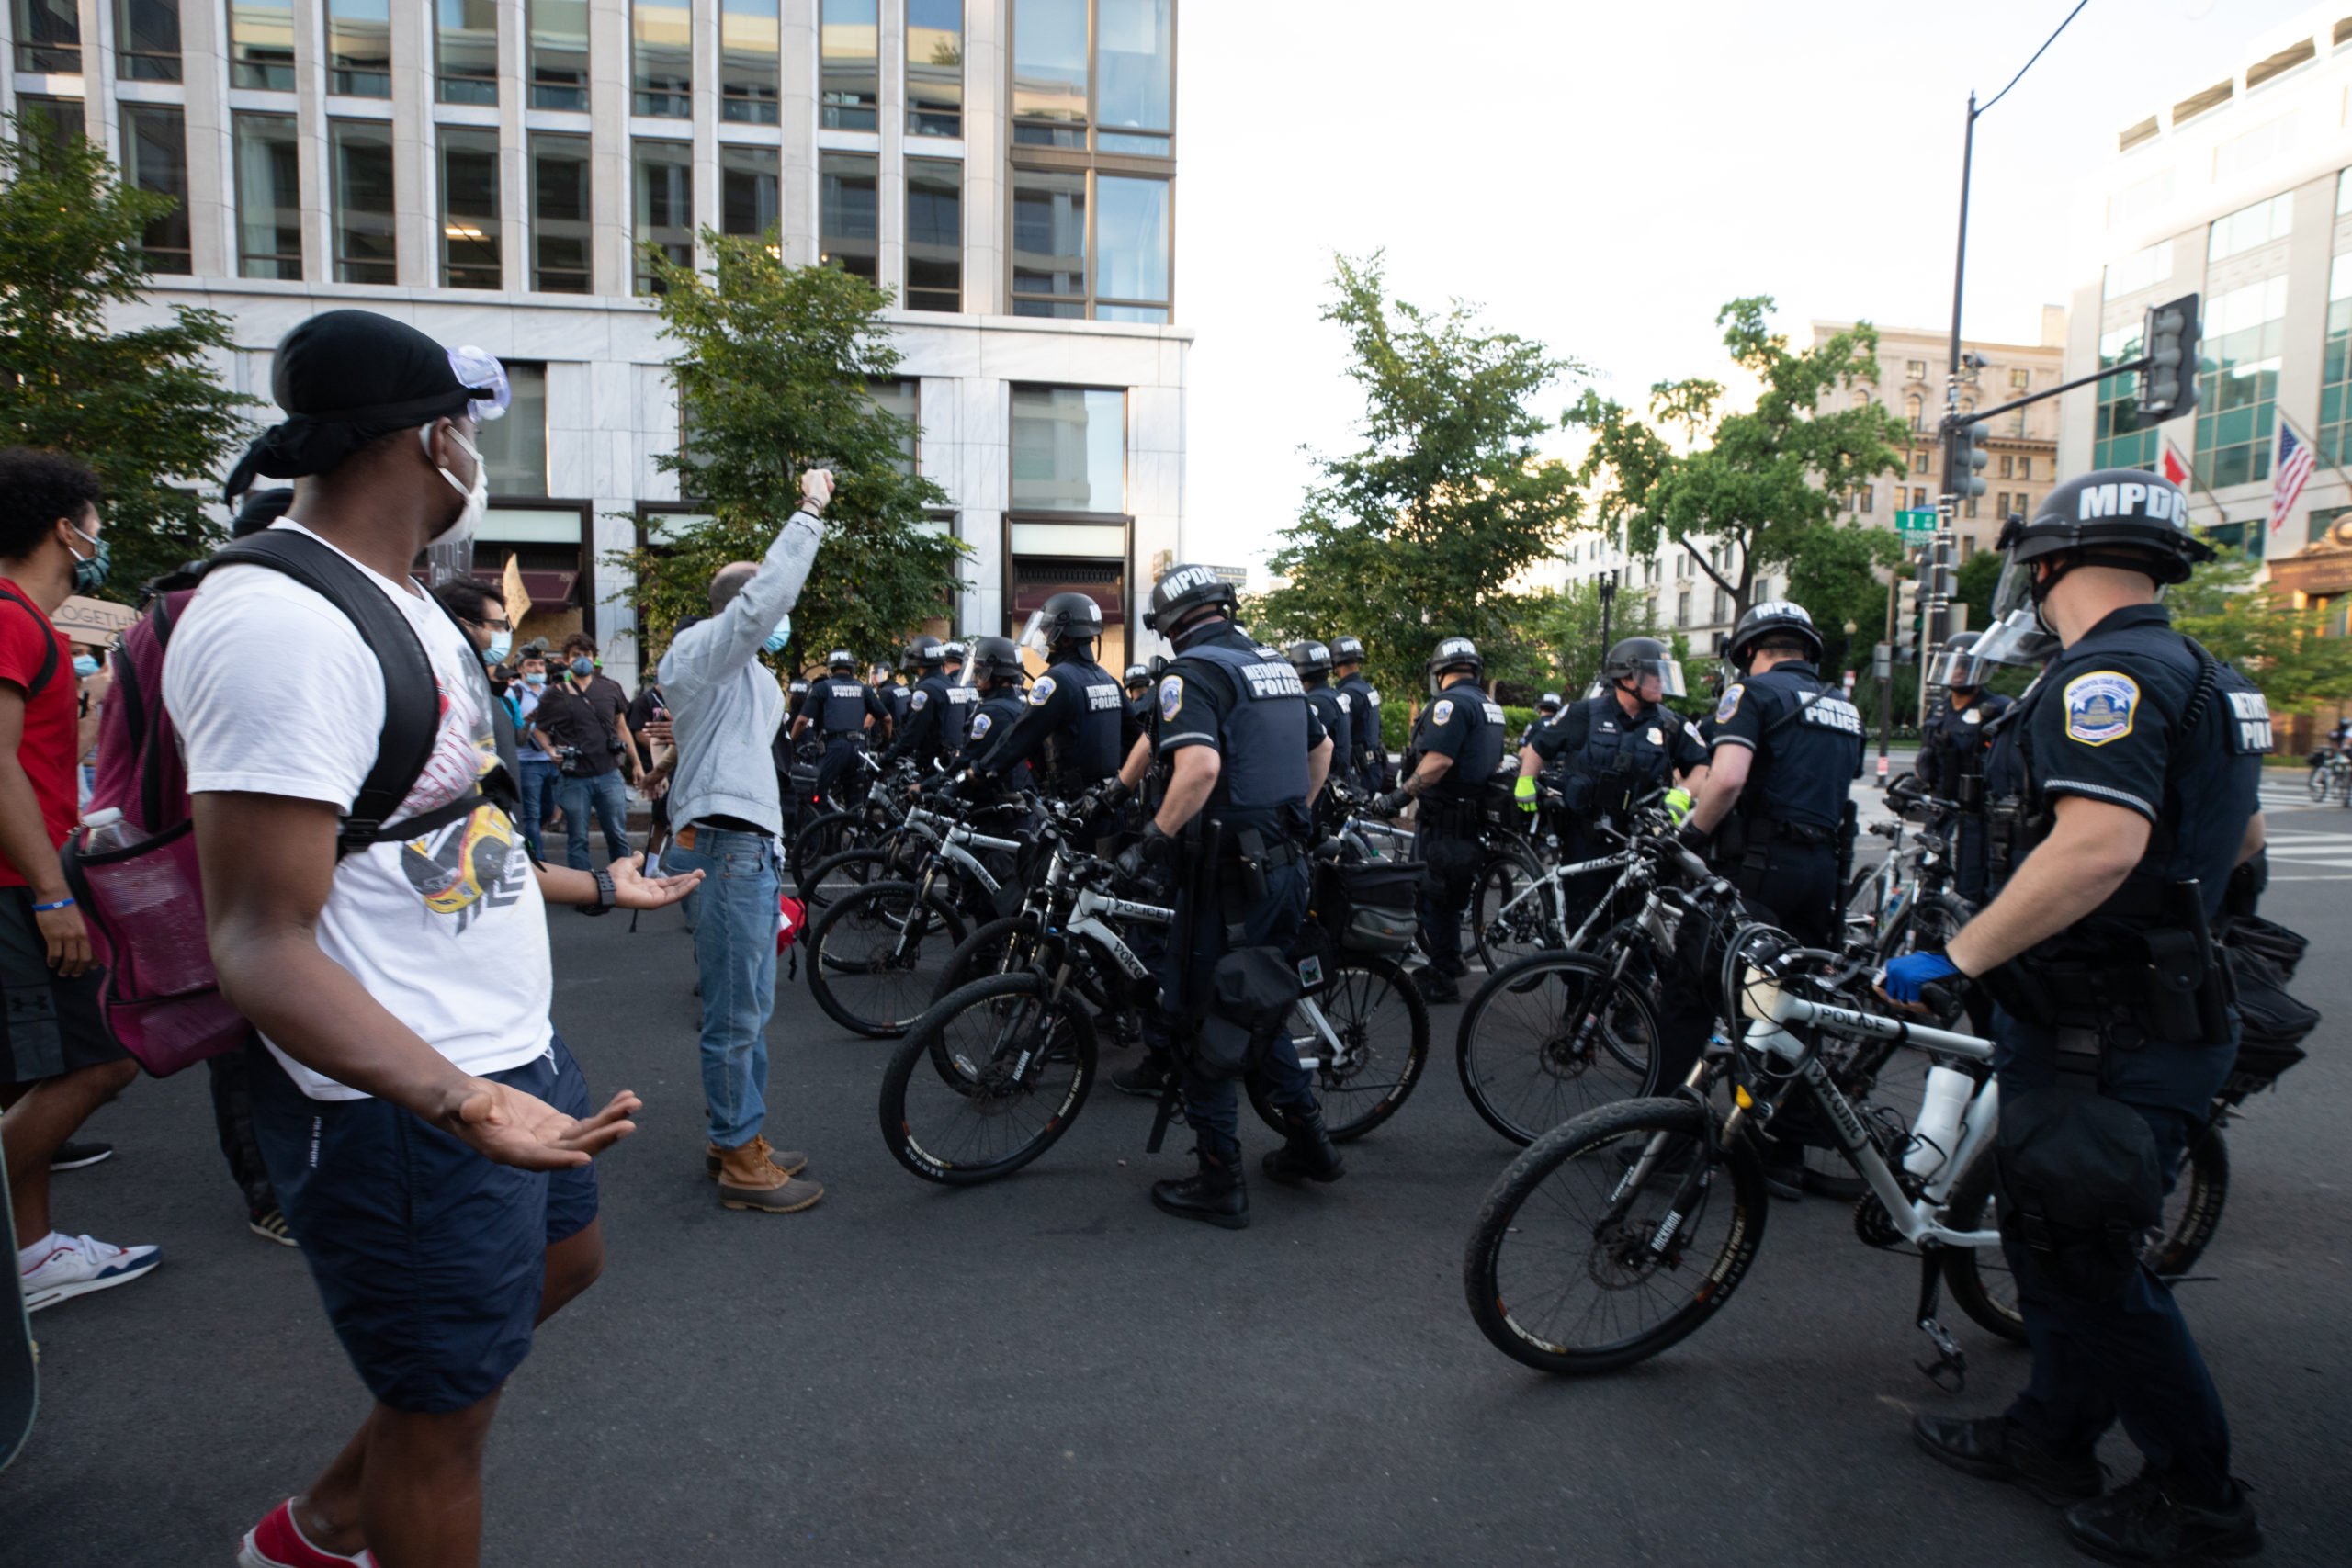 Police push back protesters near St. John's church in Washington, D.C. on June 1, 2020. (Kaylee Greenlee - Daily Caller News Foundation)